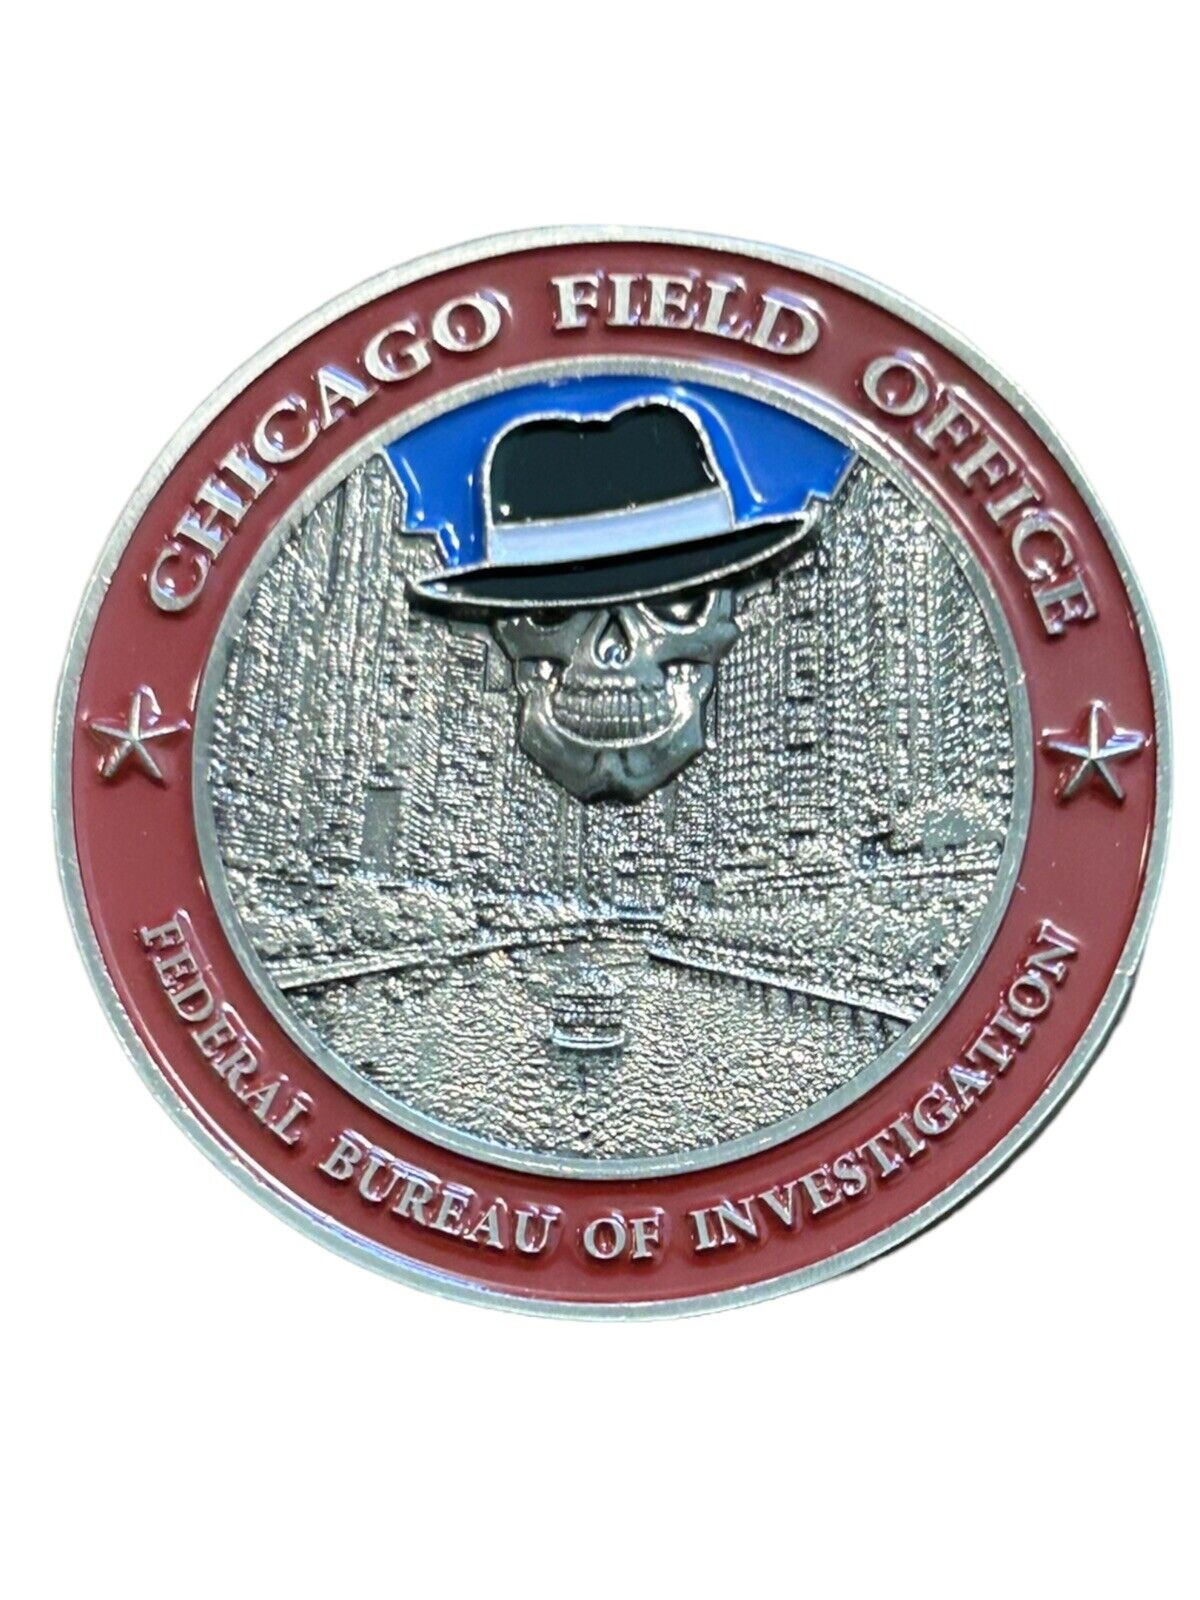 FBI Chicago Field Office Challenge Coin Federal Bureau of Investigation IL Agent